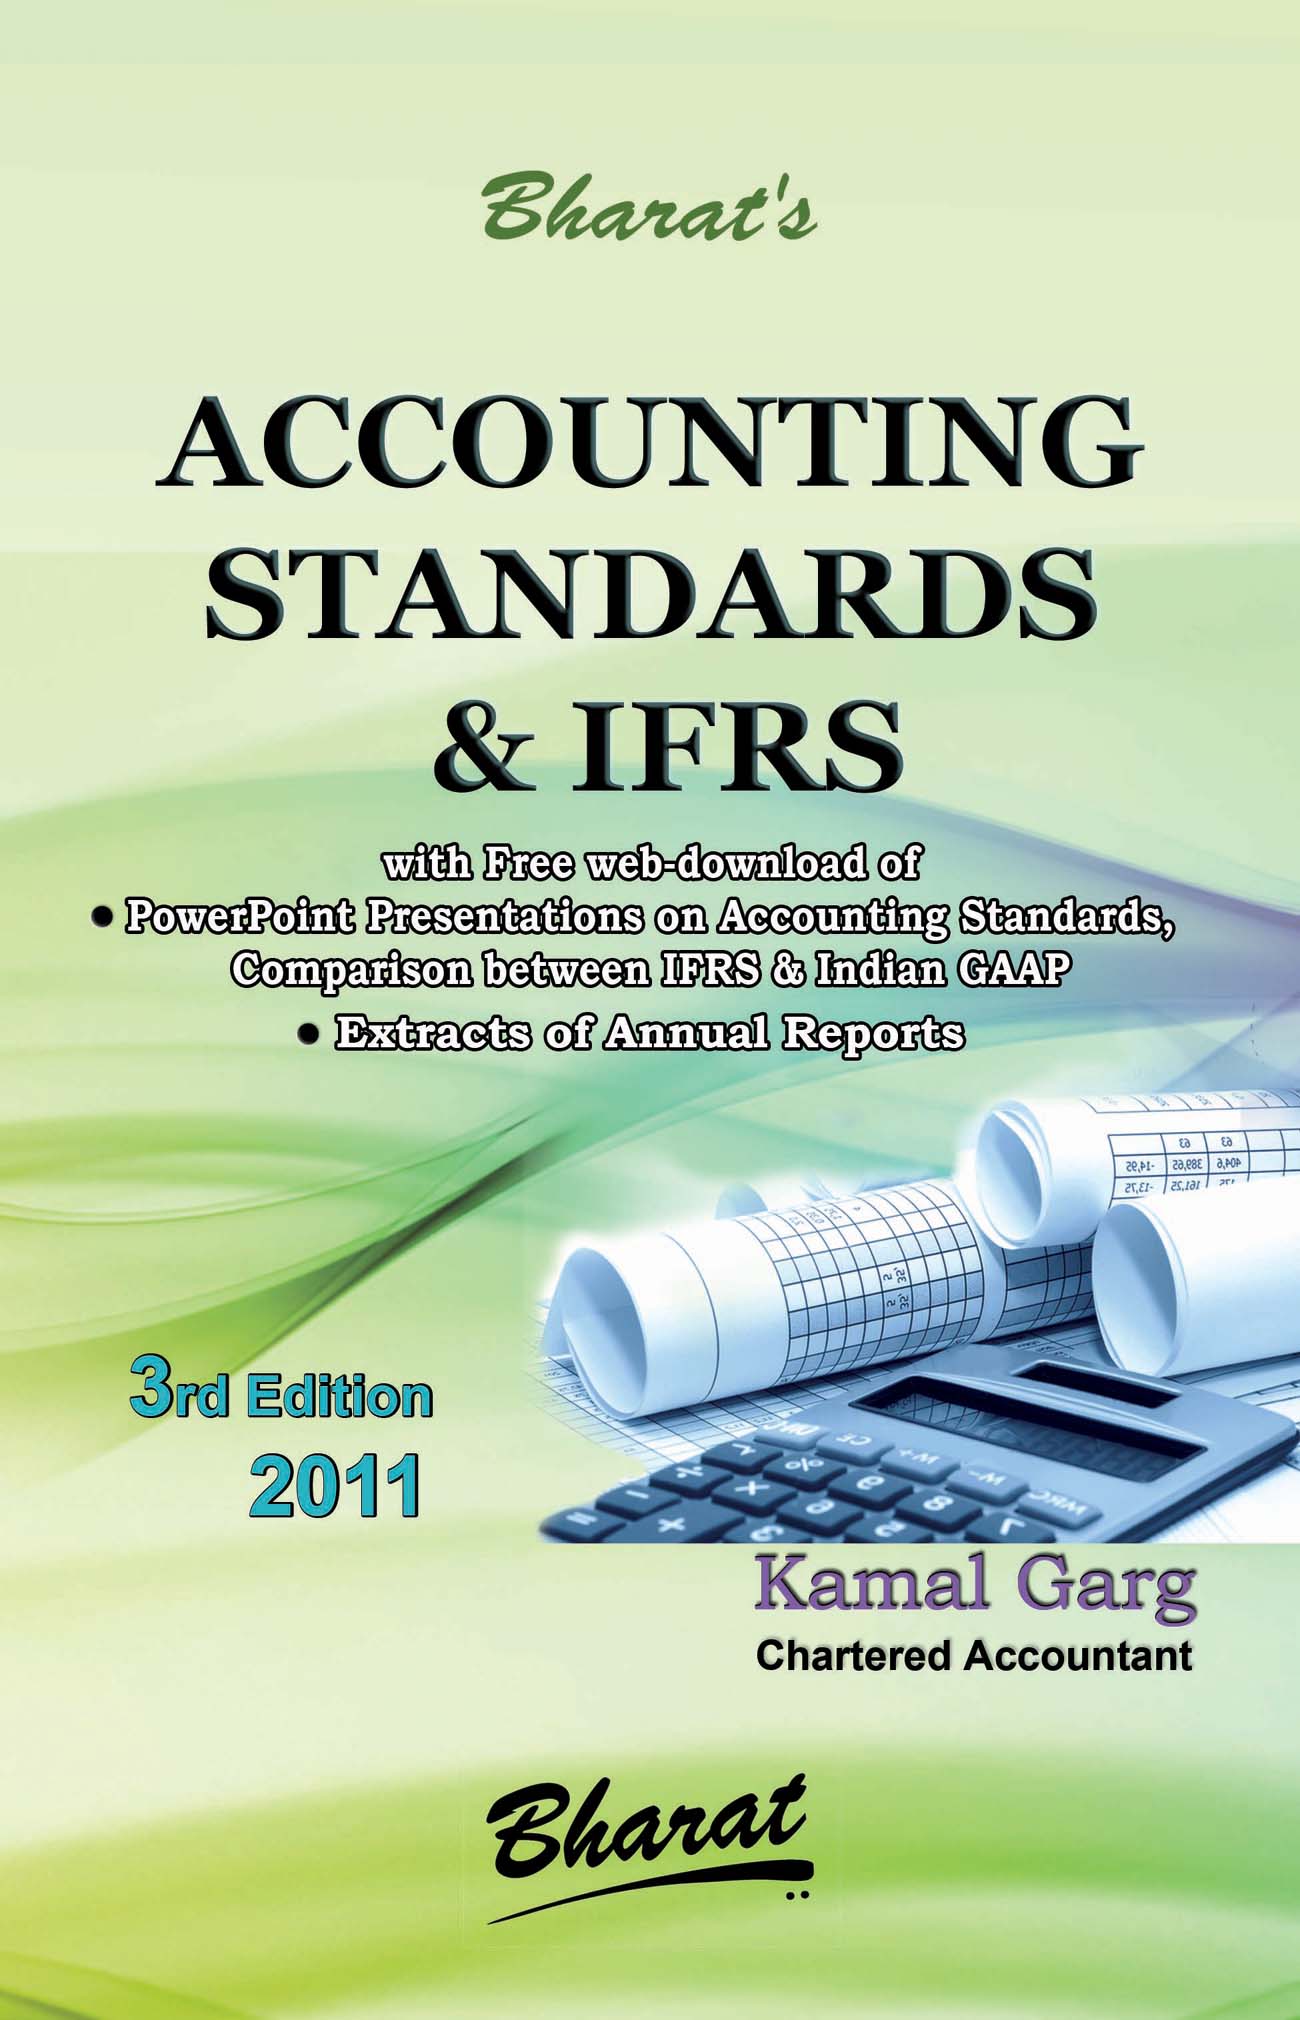 ACCOUNTING STANDARDS & IFRS (with FREE DOWNLOAD)